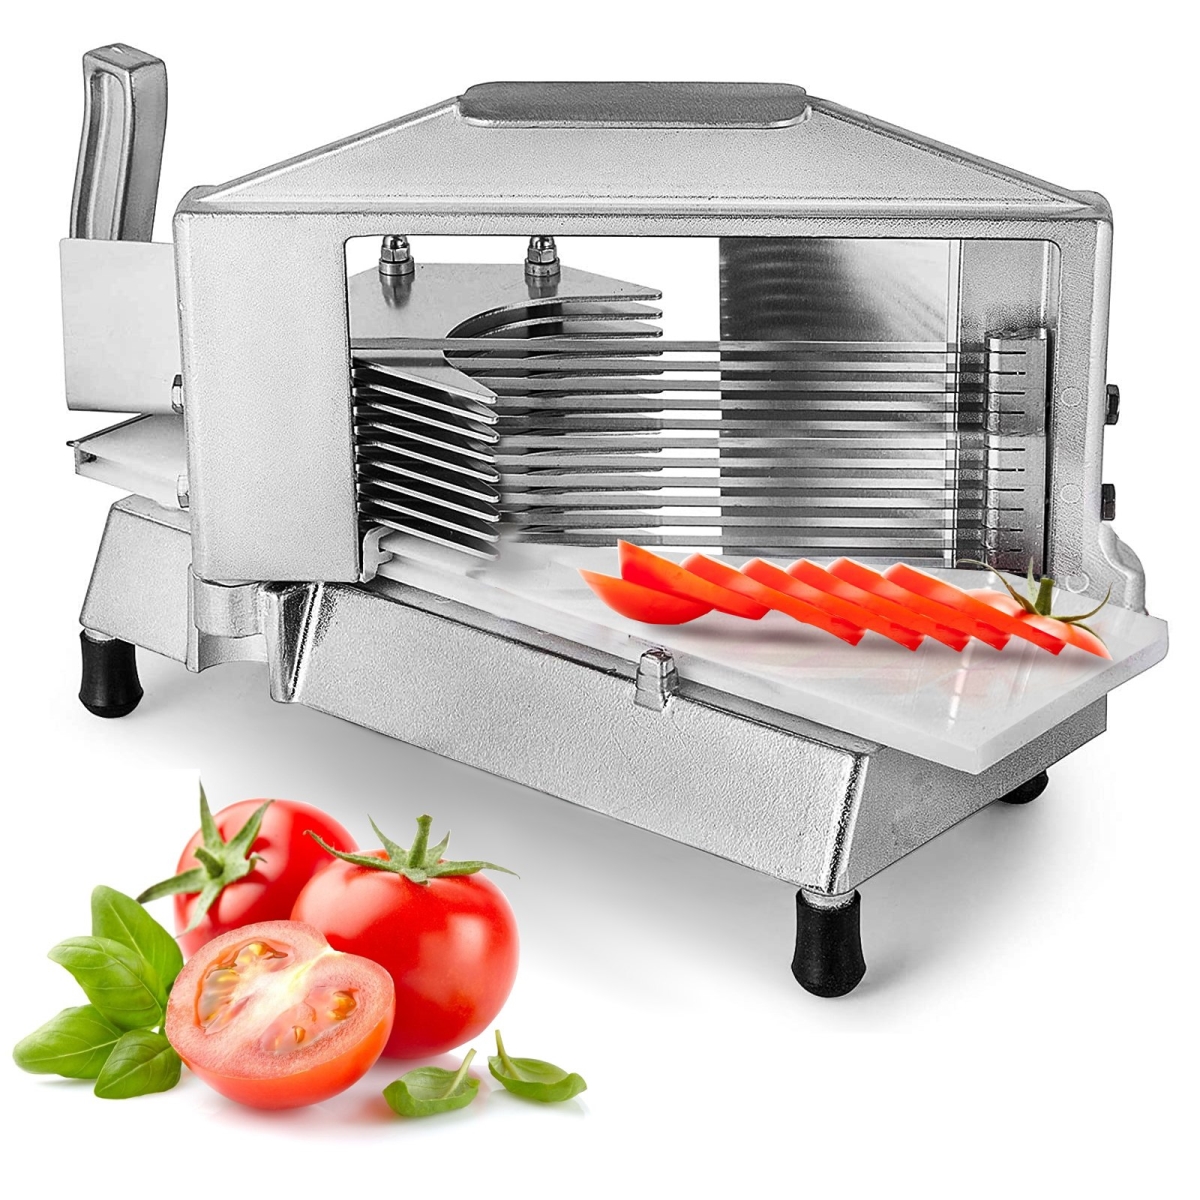 Picture of Vevor 1-4YCXHSQPJ000001V0 Commercial Tomato Slicer with 0.25 in. Heavy Duty Cutter